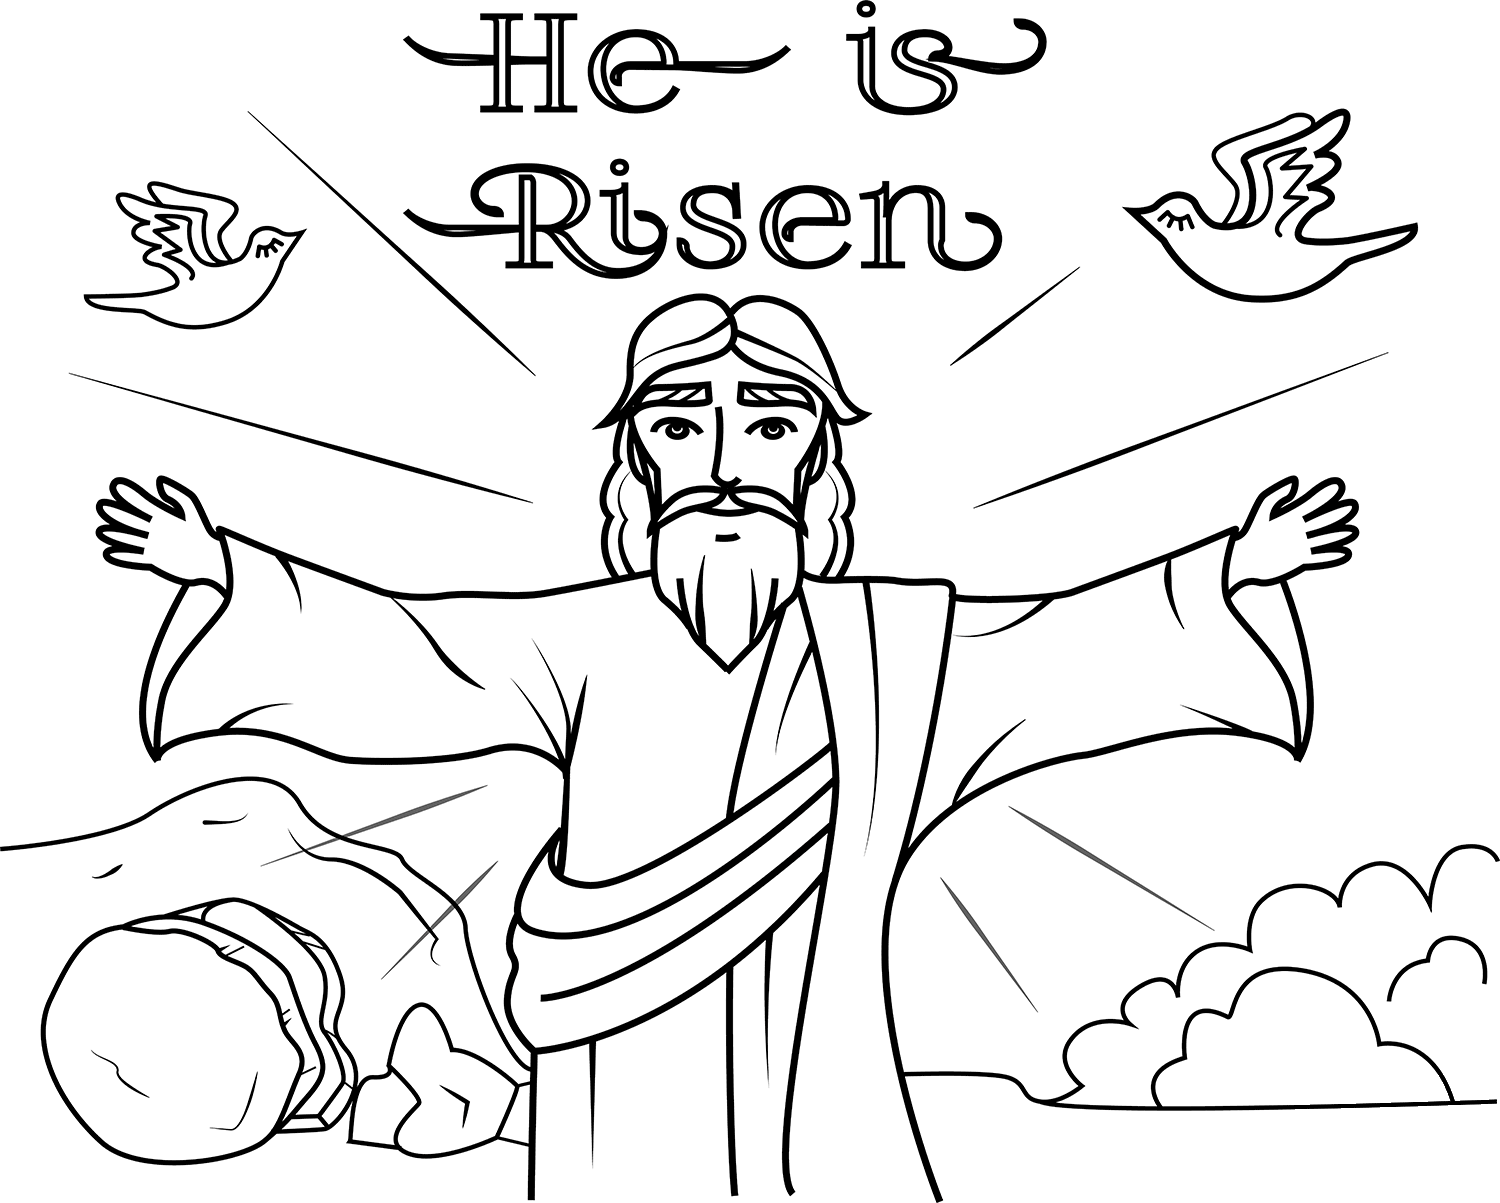 He is Risen coloring page - ColouringPages